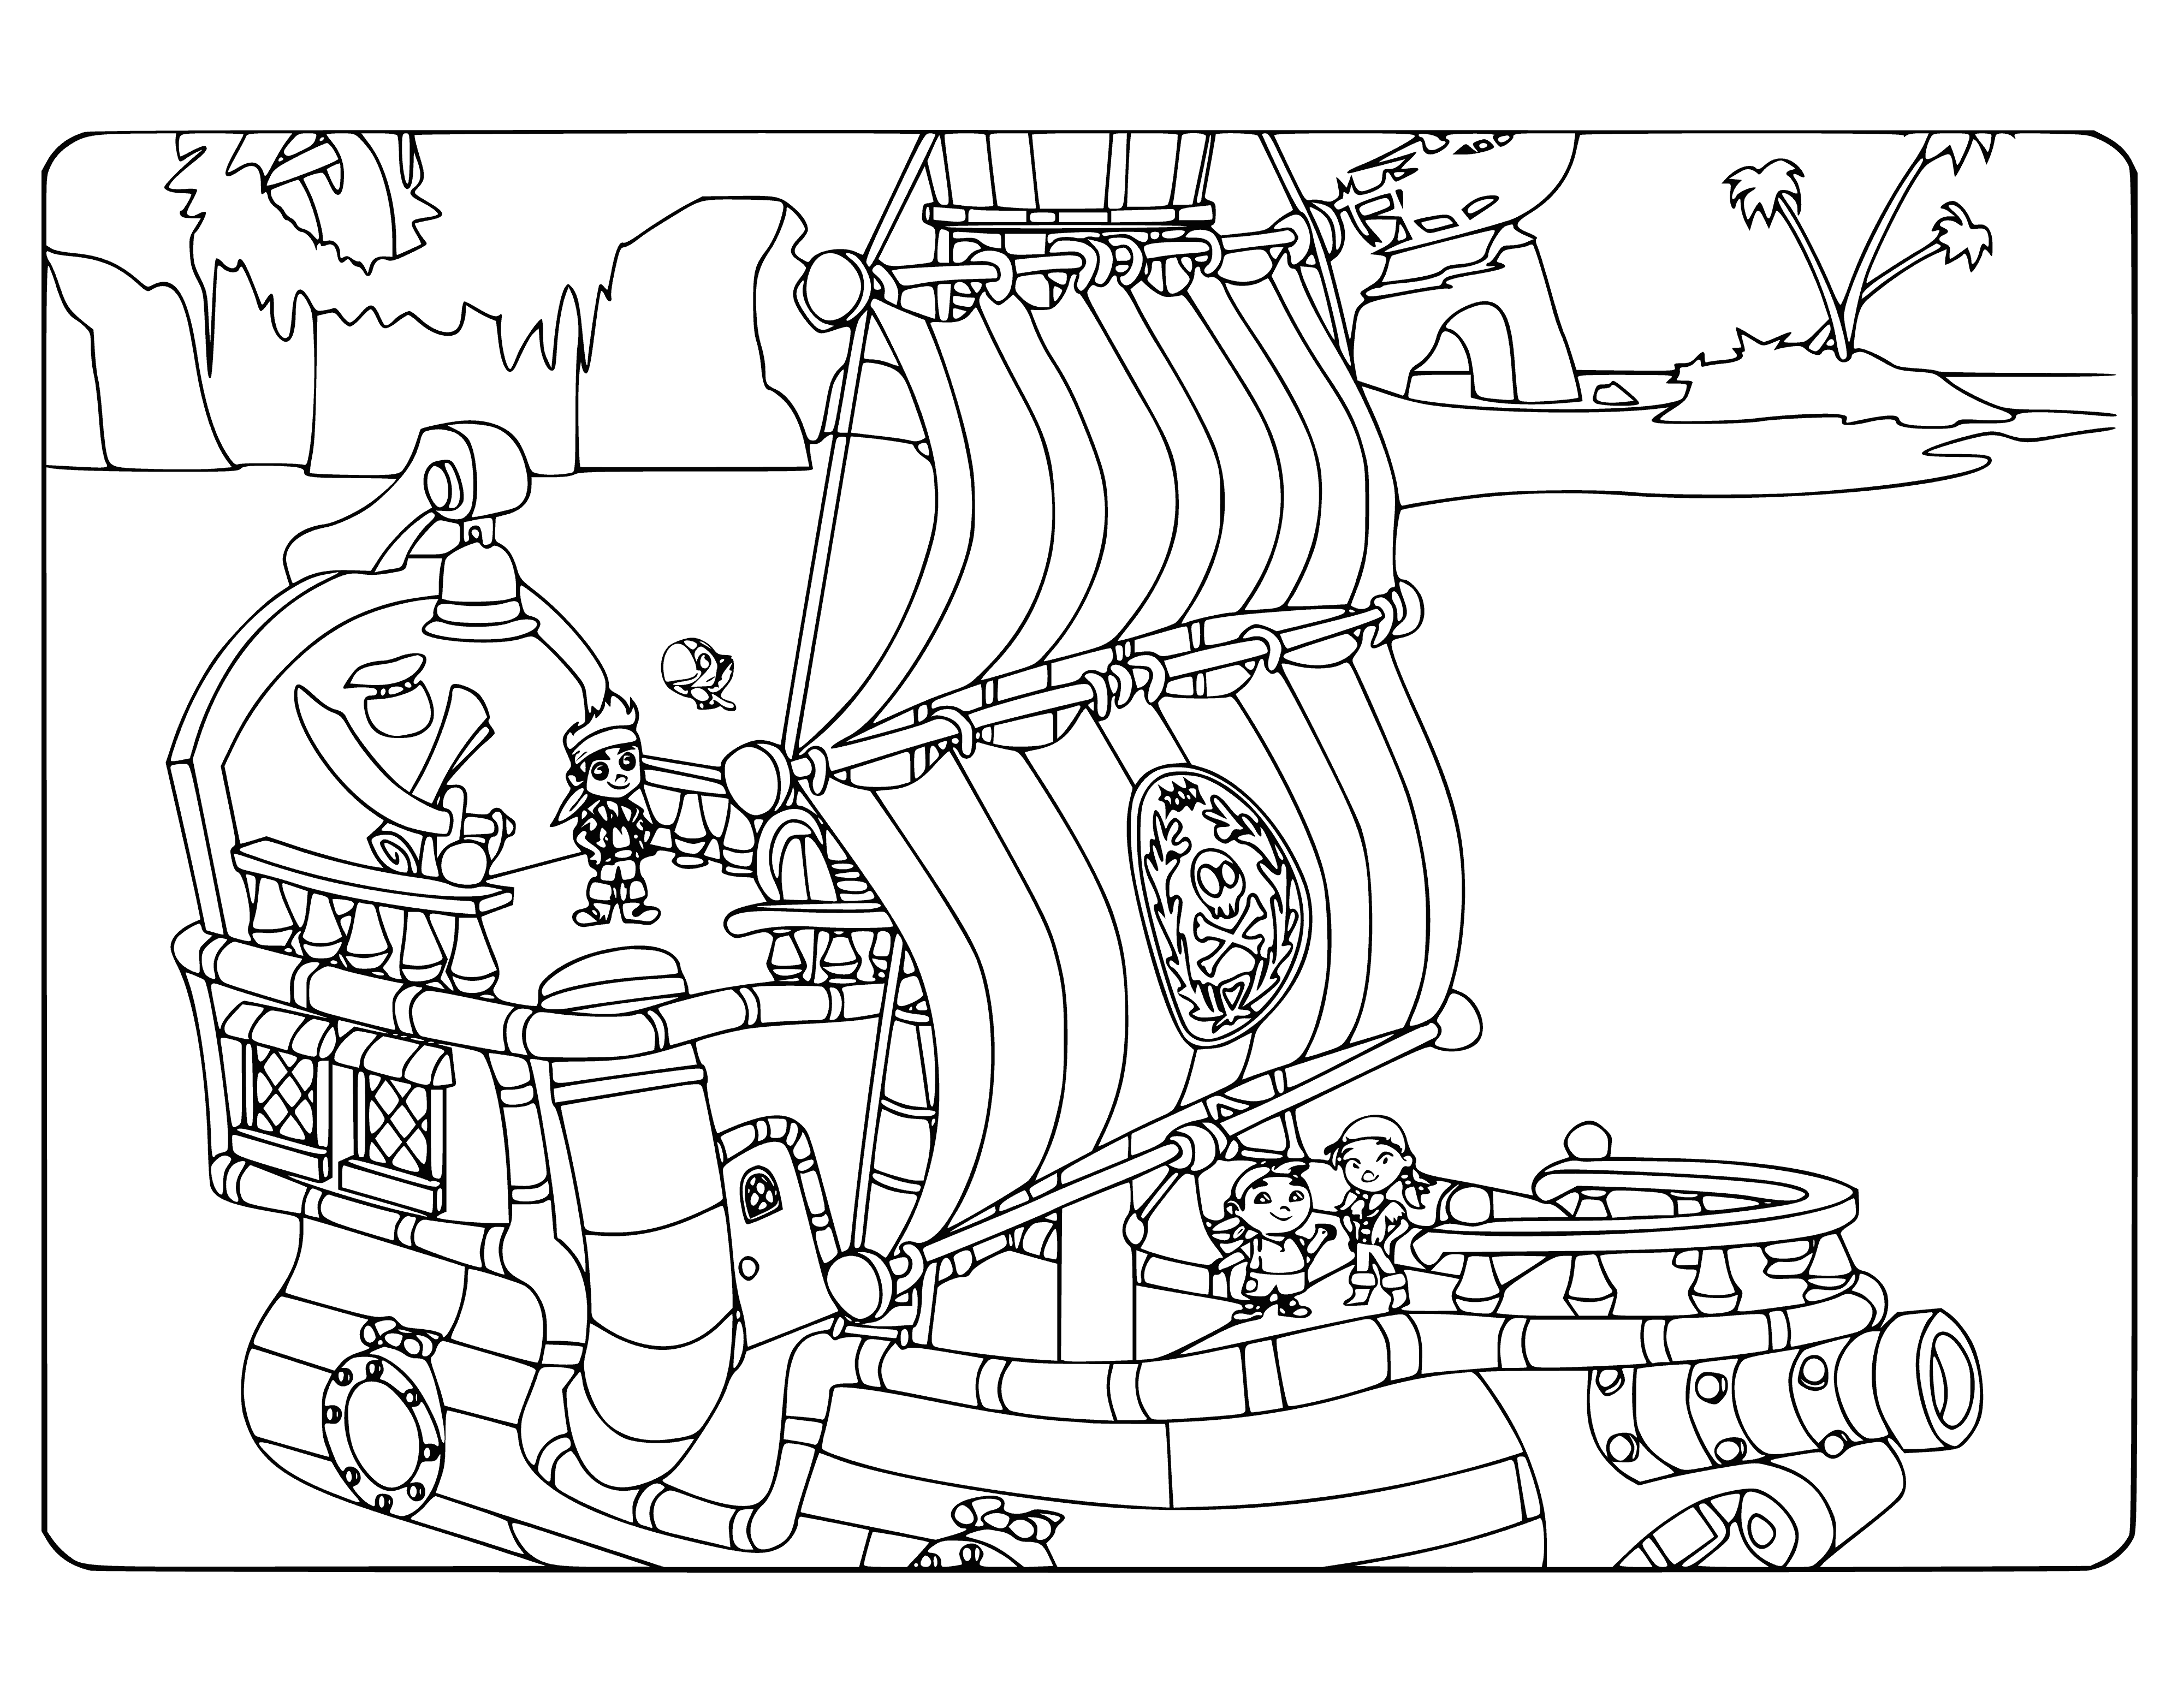 coloring page: Large pirate ship w/ 3 sails, crow's nest, slide, & pirate flag. #pirates